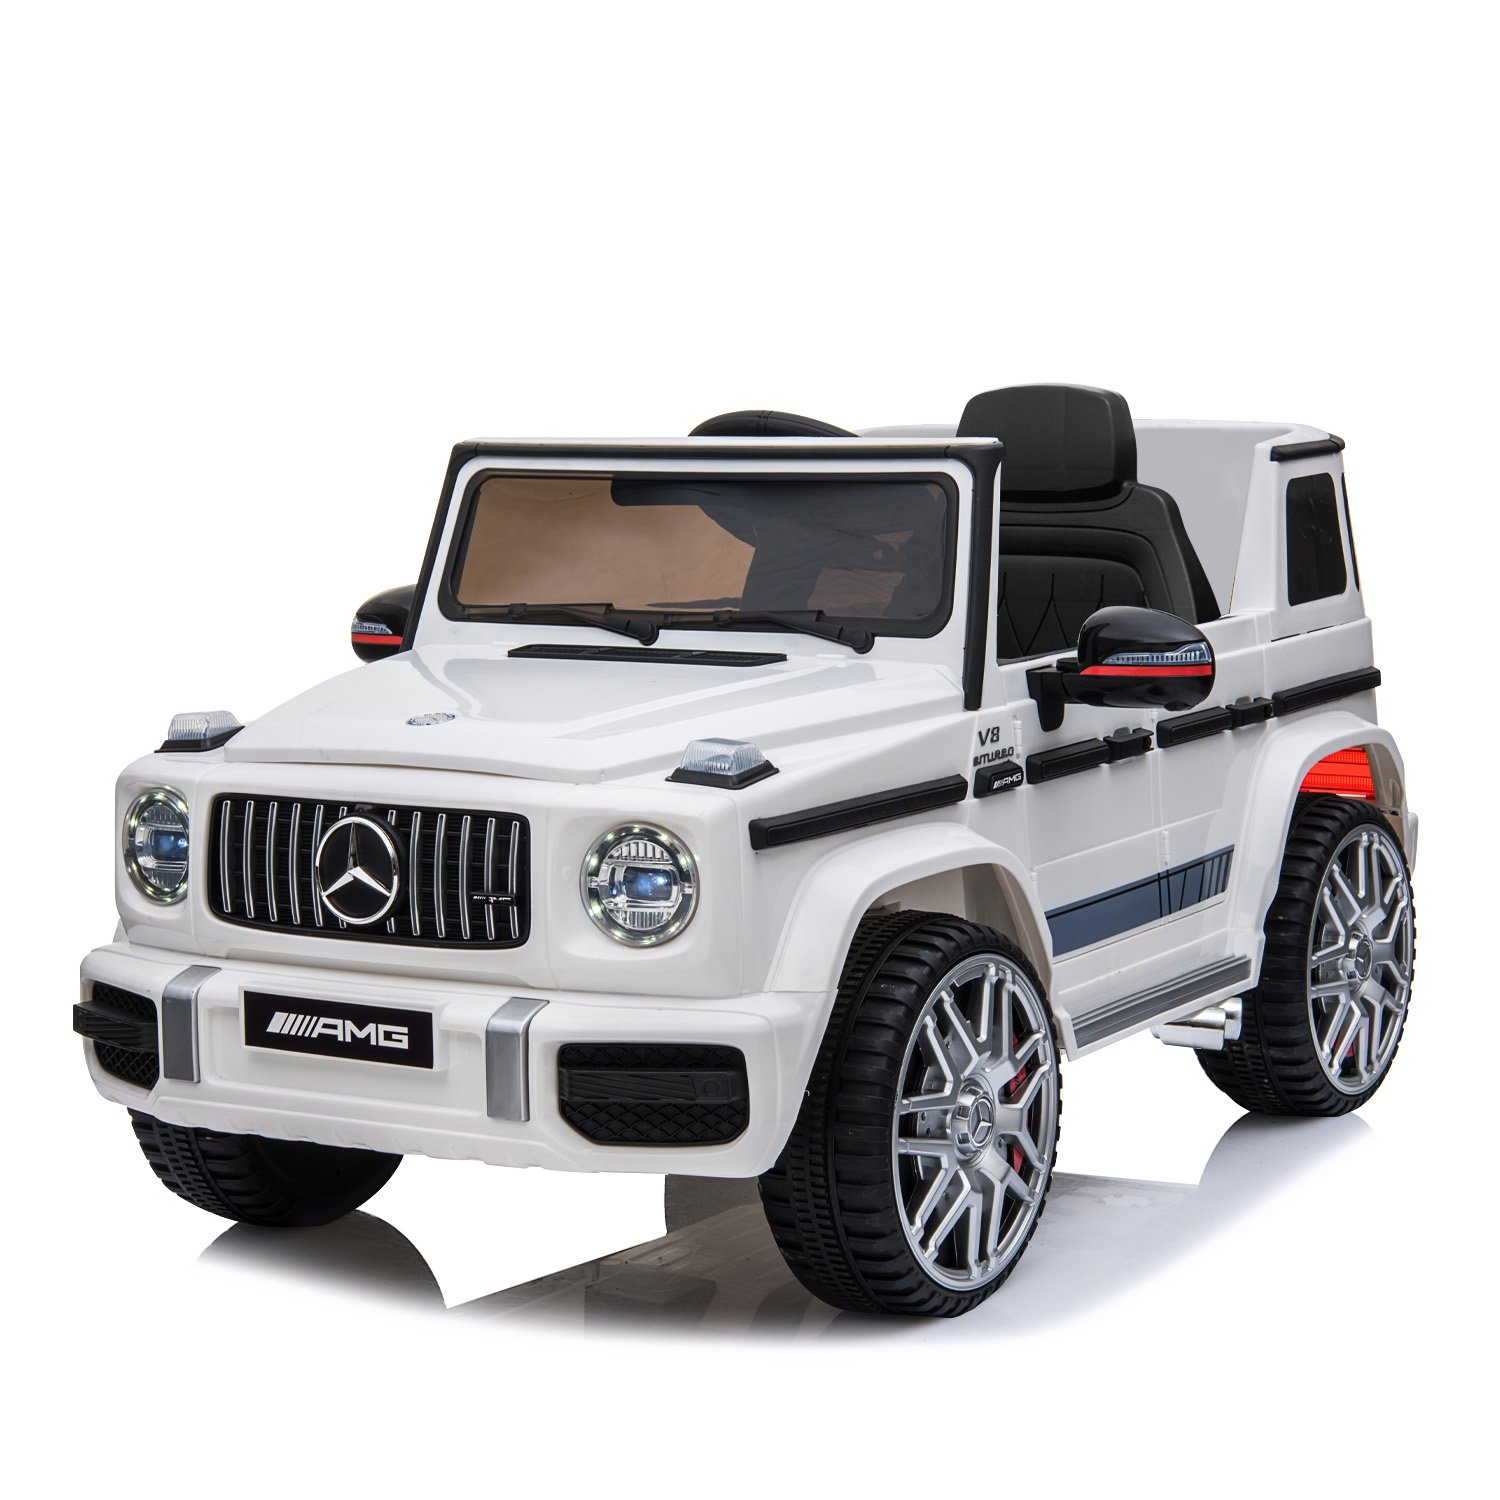 Mercedes Benz AMG G63 Licensed Kids Ride On Electric Car Remote Control - White 2